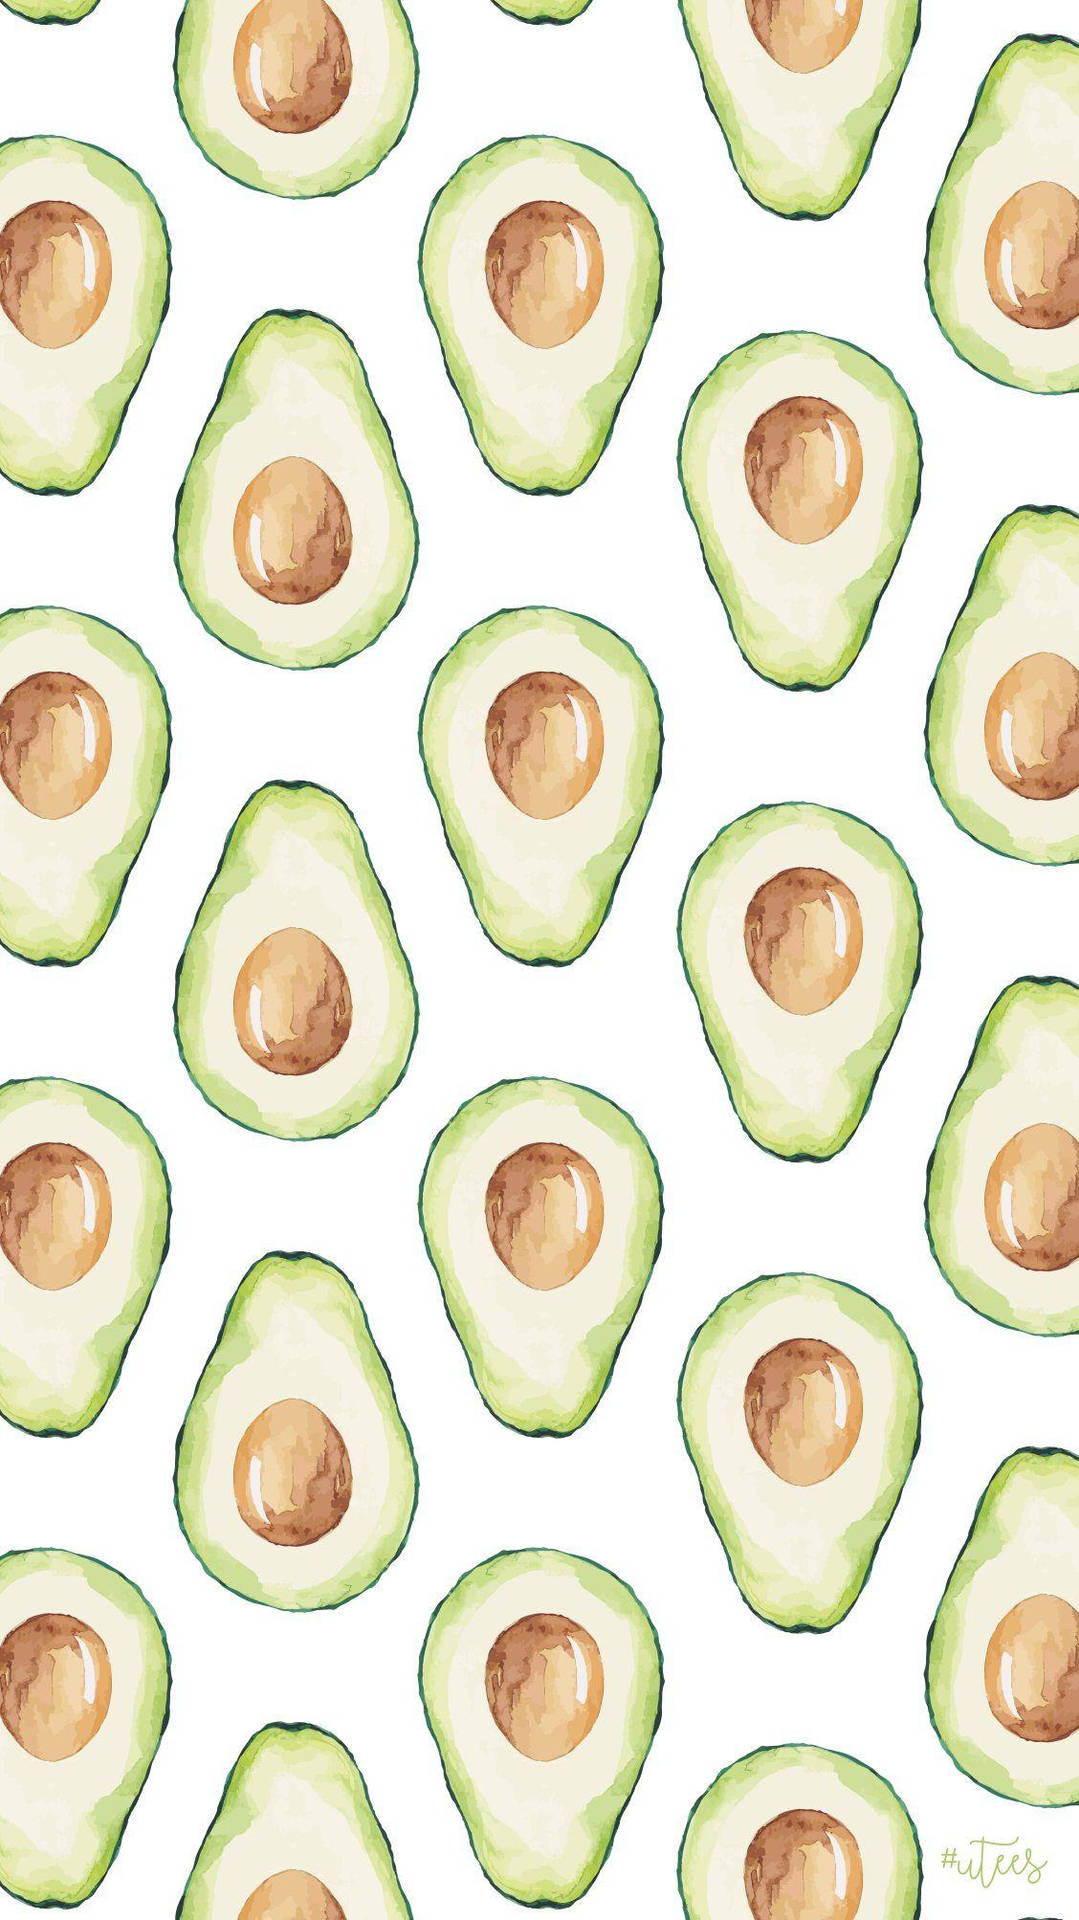 Artsy Avocado Fruit Patterns Digital Painting Picture